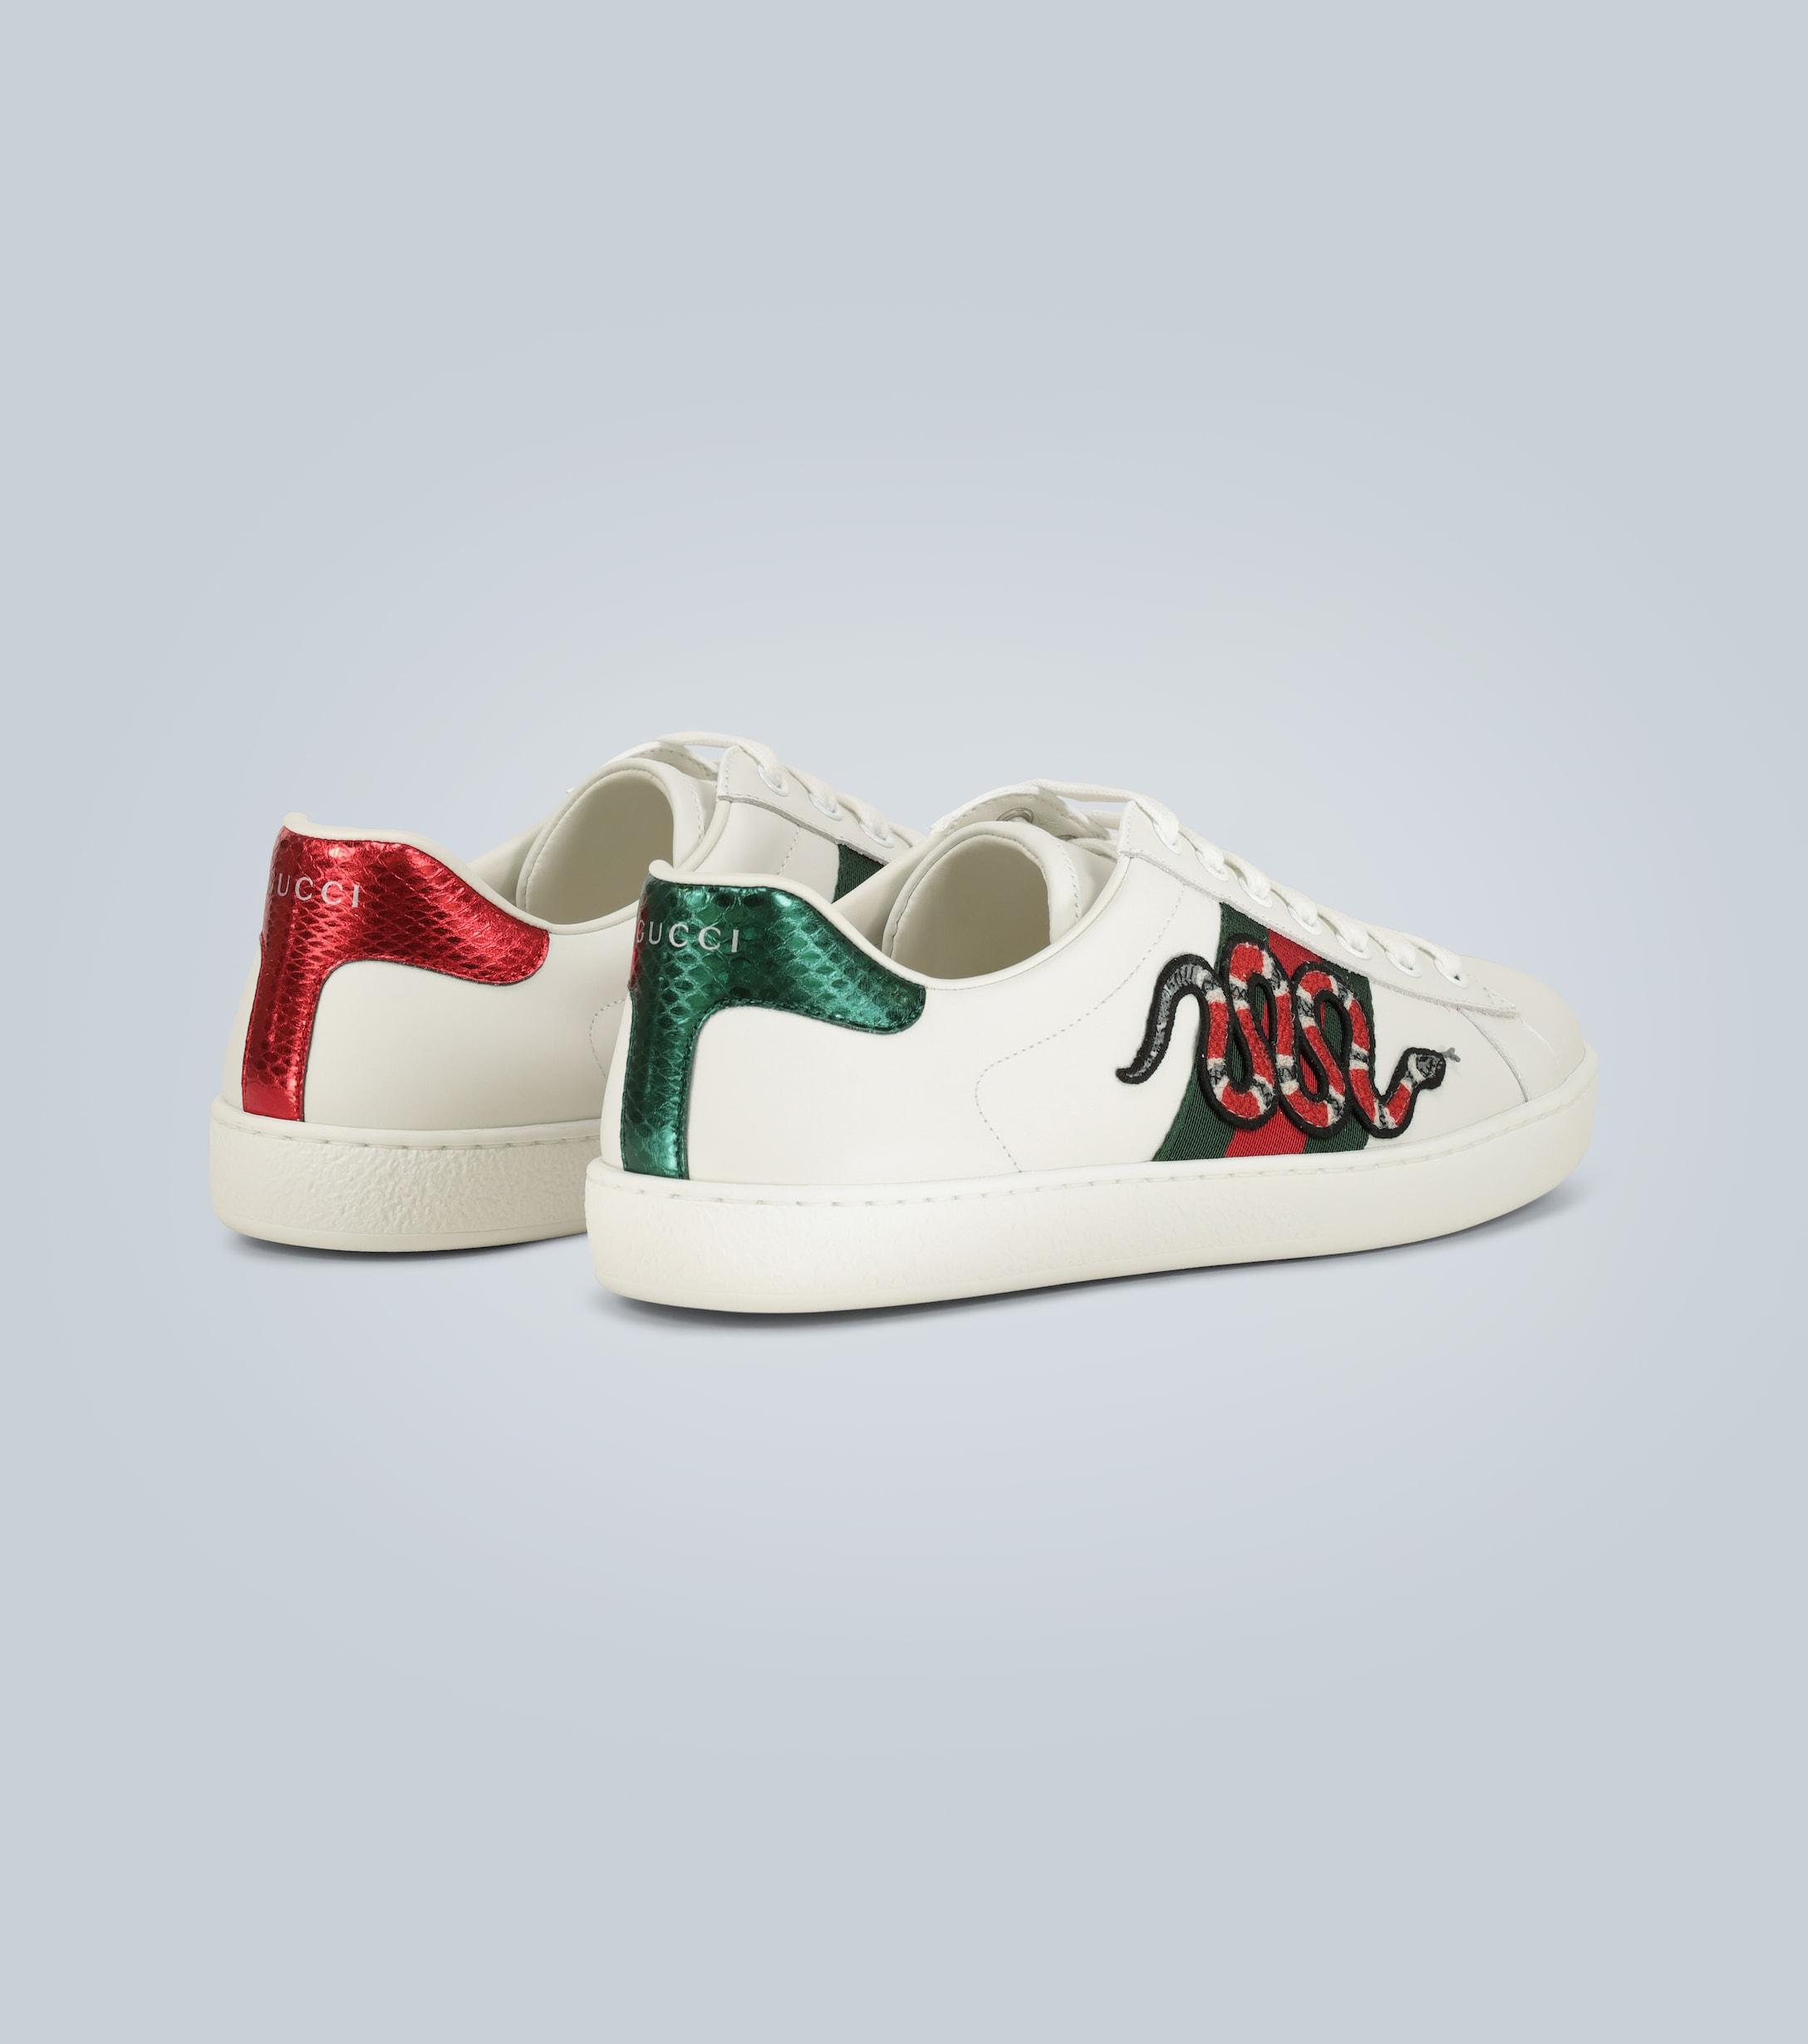 gucci white shoes snake